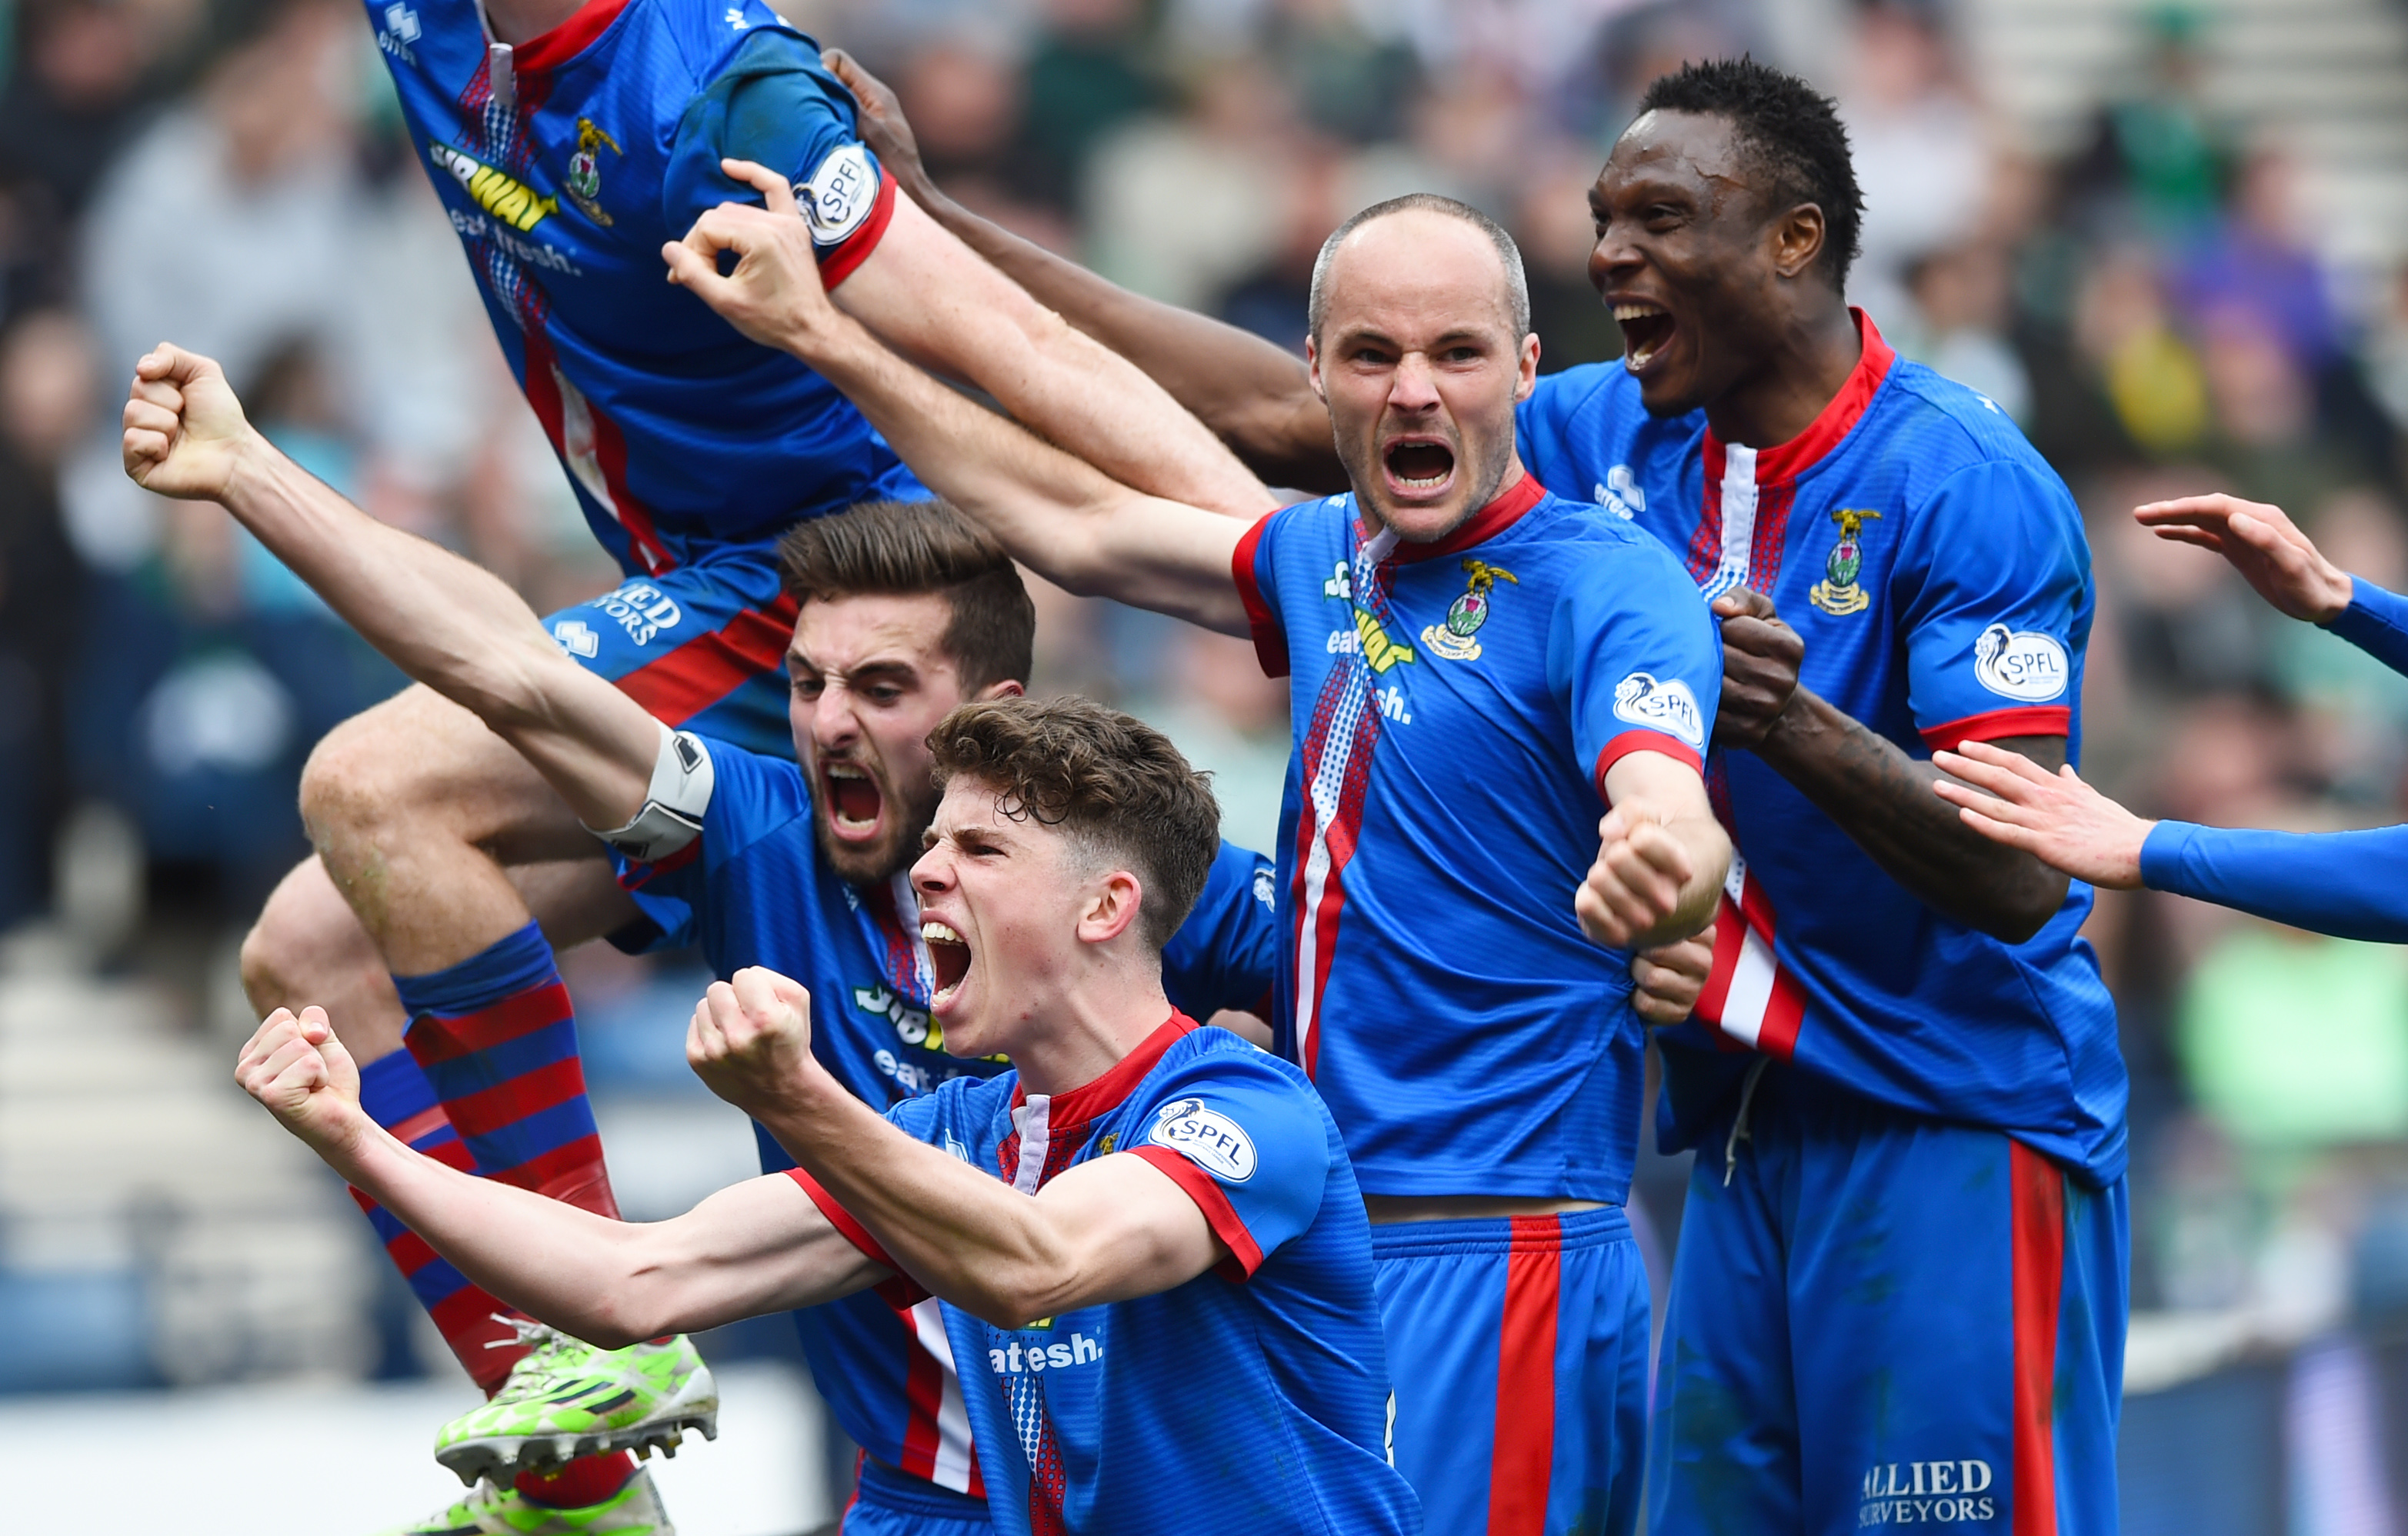 Caley Thistle famously upset Celtic on their way to winning the Scottish Cup in 2015.